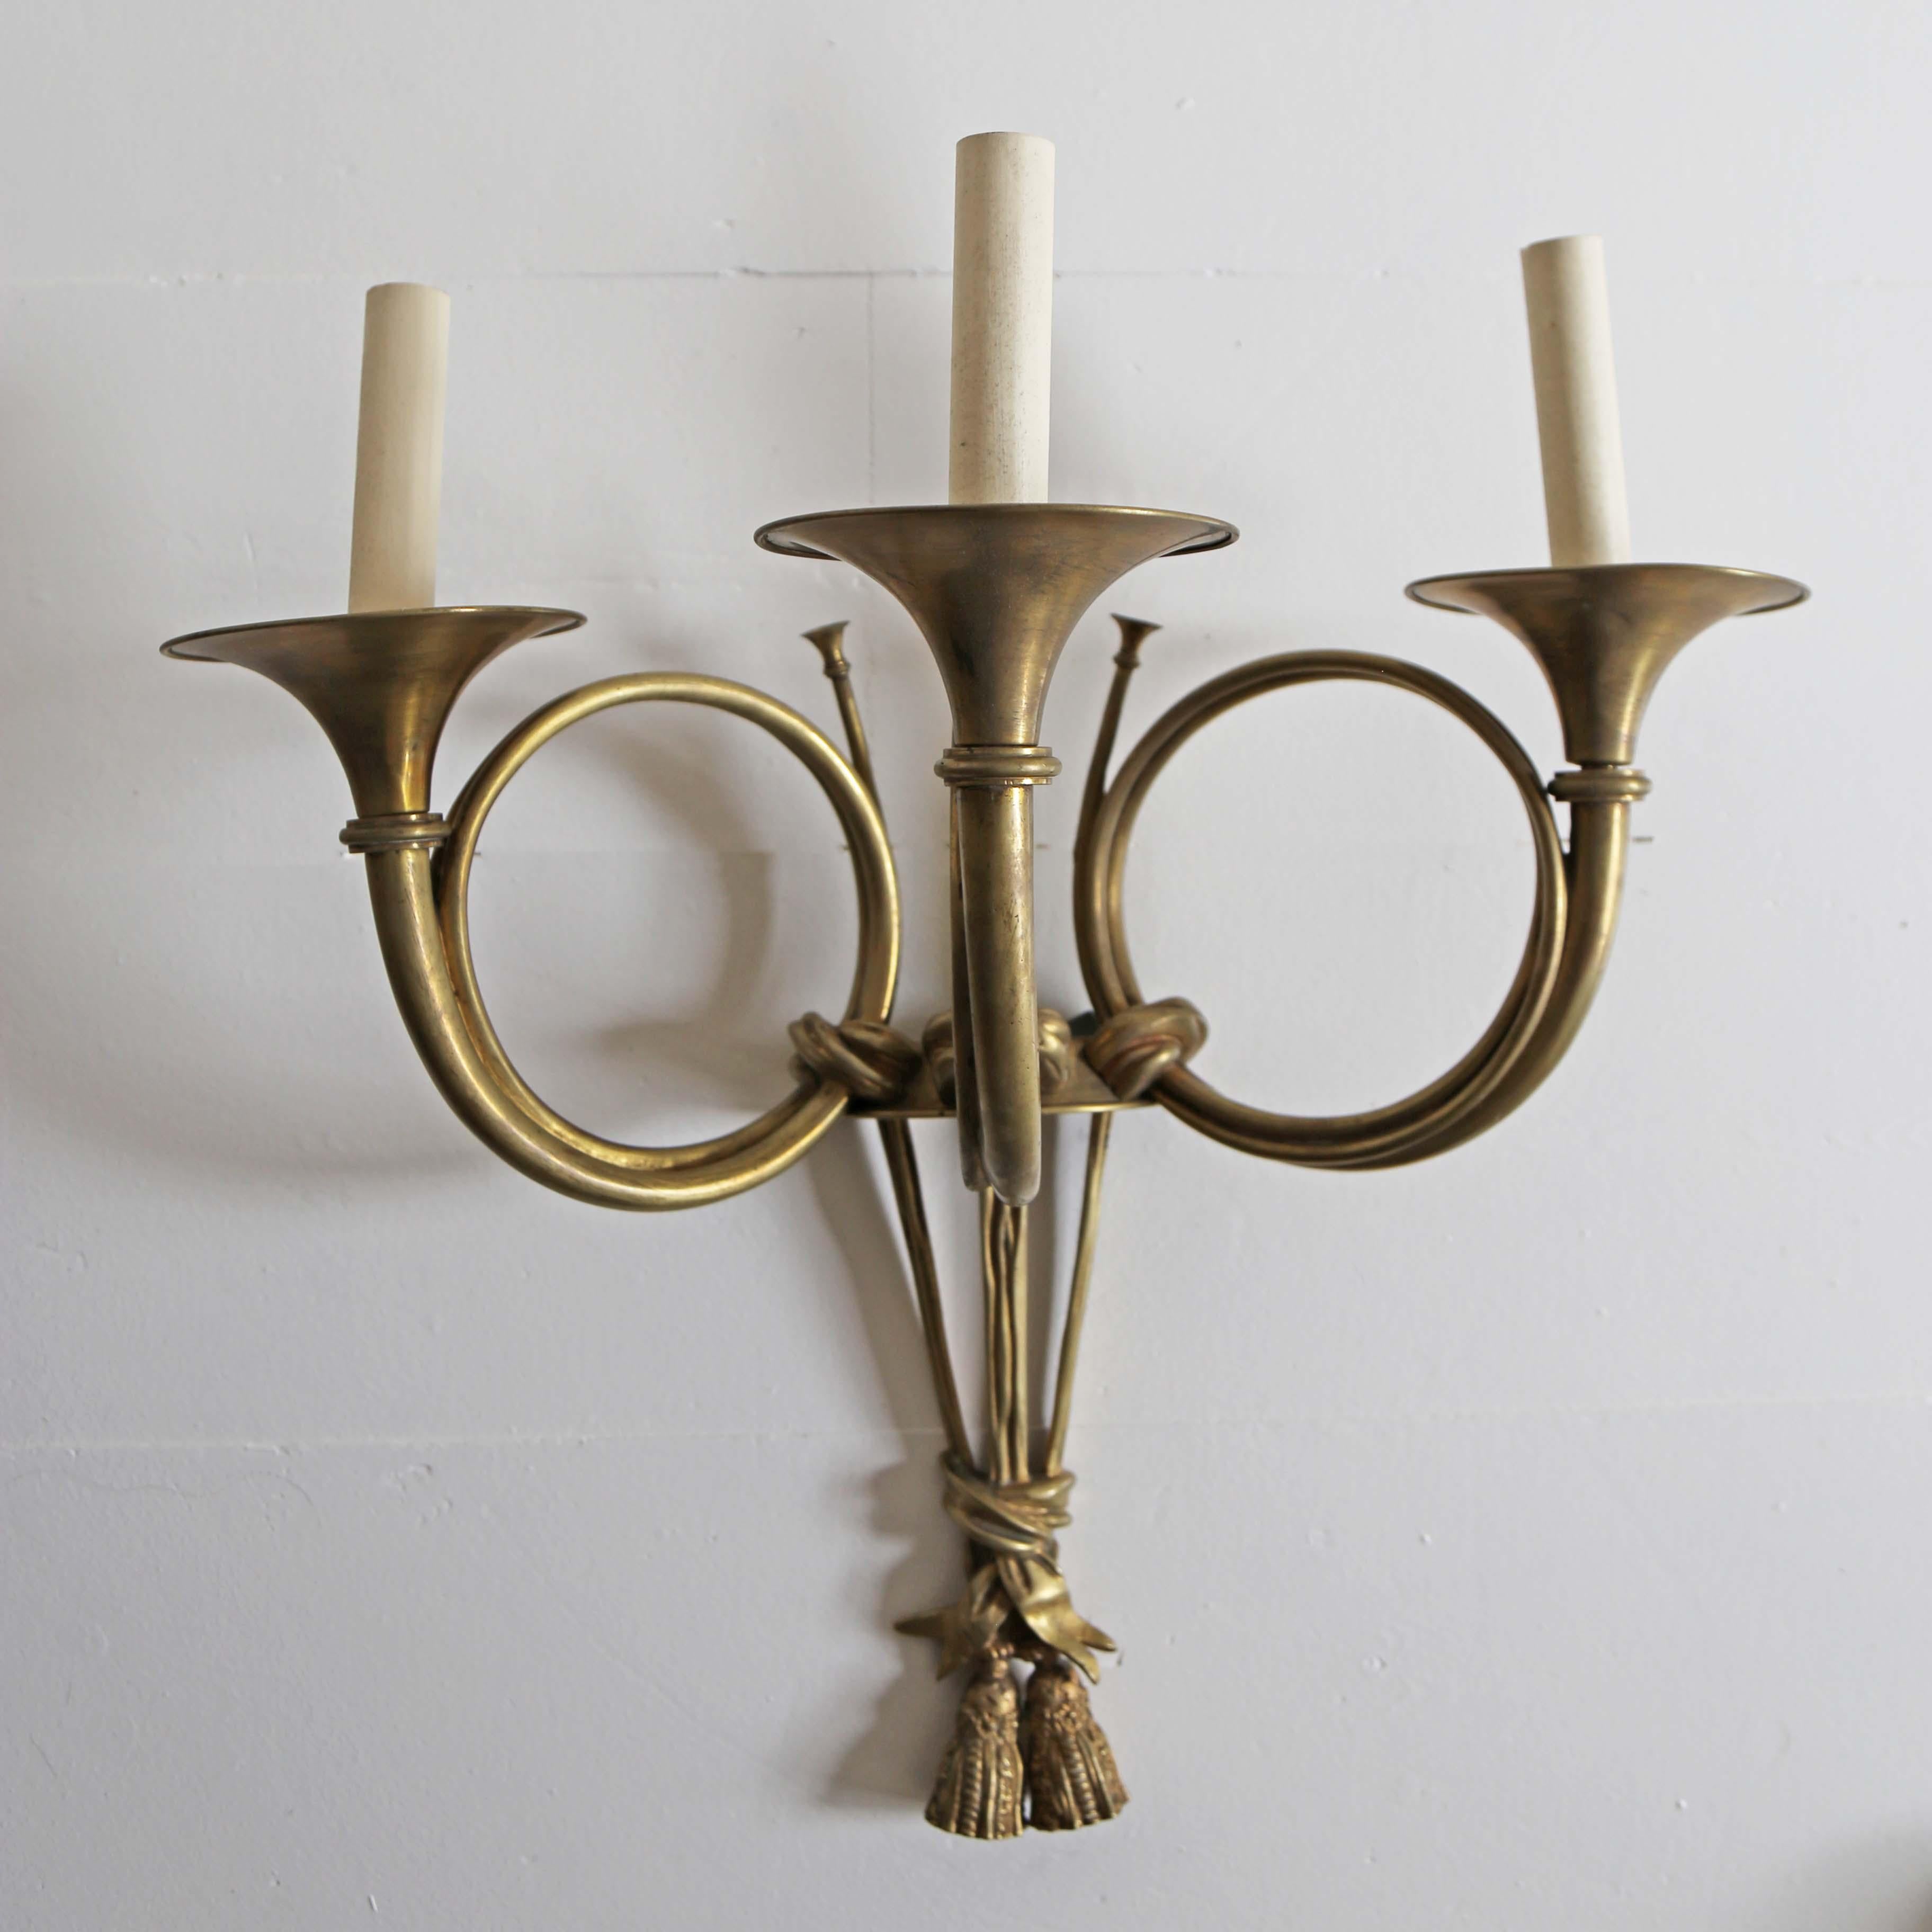 Set of four trumpets wall lights from circa 19th Century in brass.

